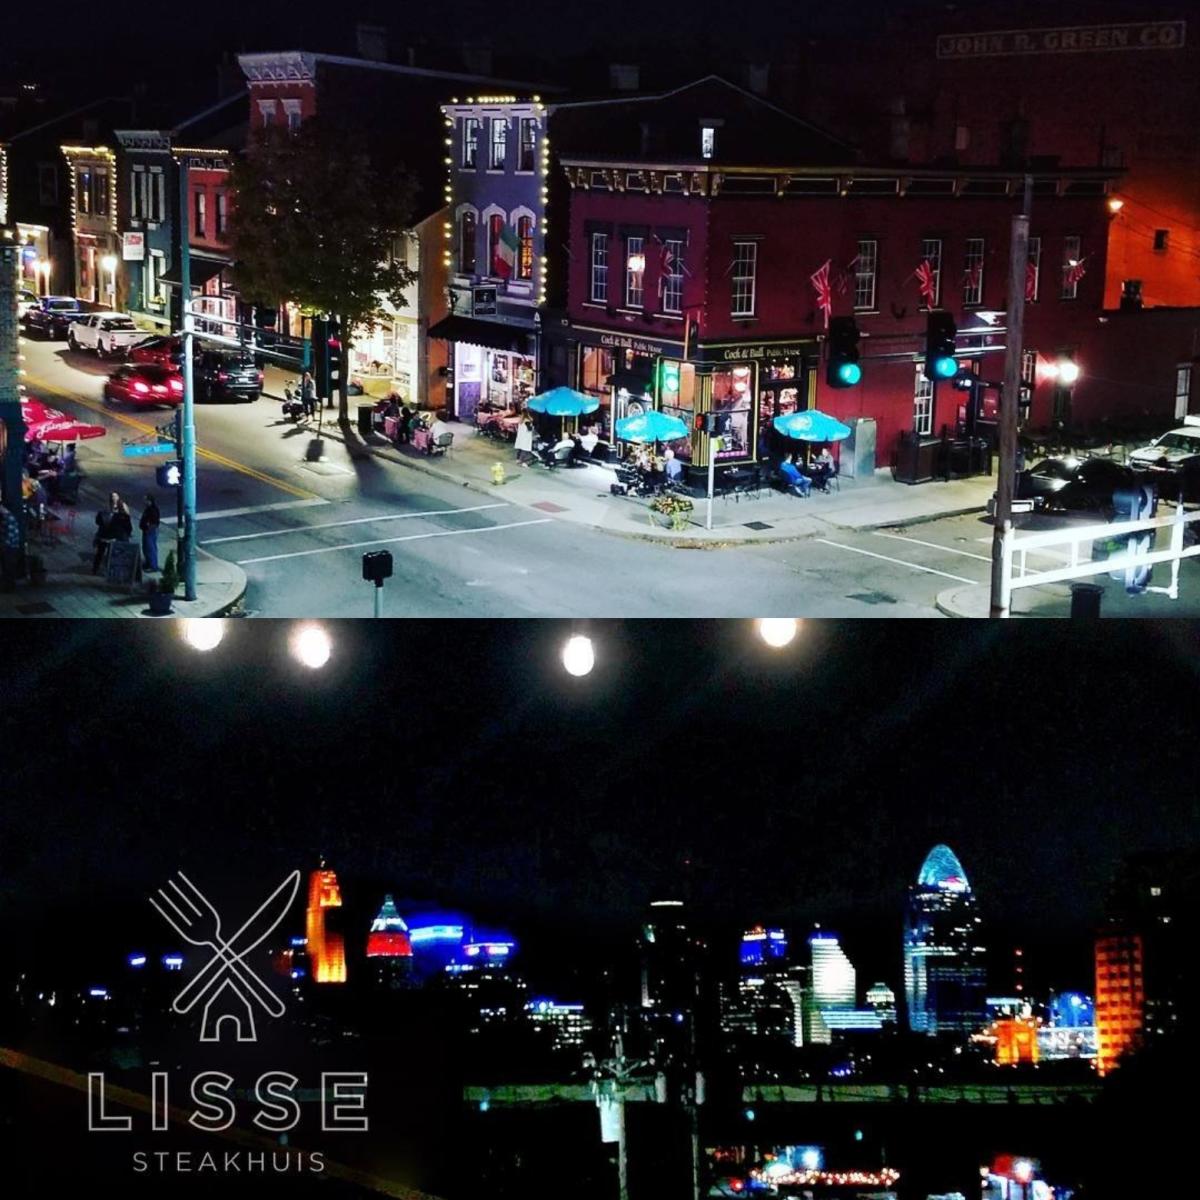 Shows two night views from Lisse restaurant, one of Mainstrasse Covington, Ky and one of the Cincinnati Skyline and Ohio River